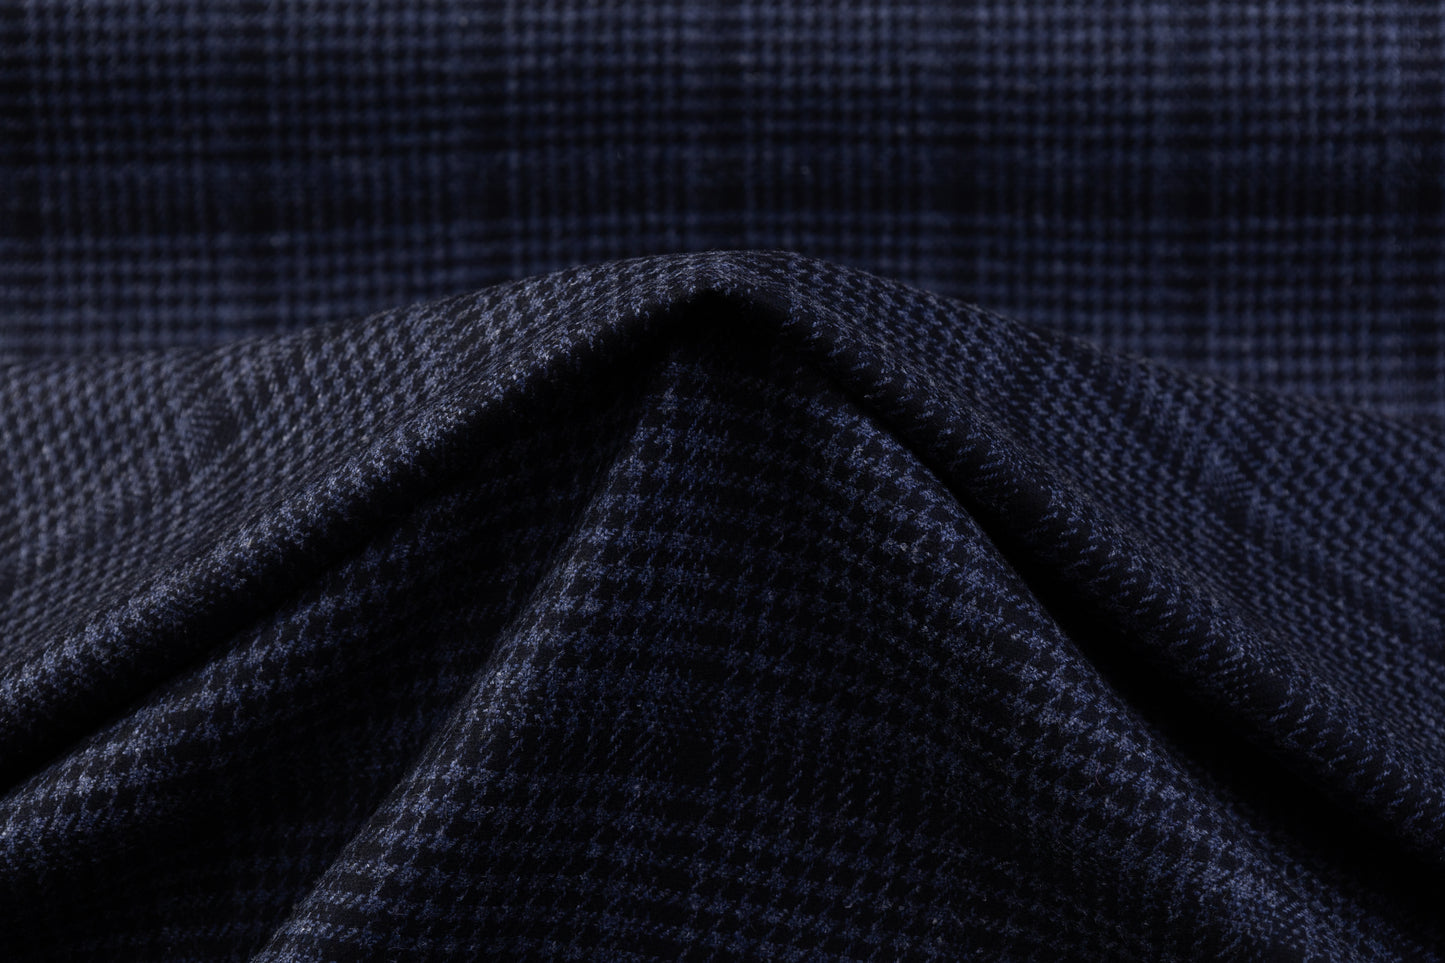 Checked Italian Wool Suiting - Navy Blue